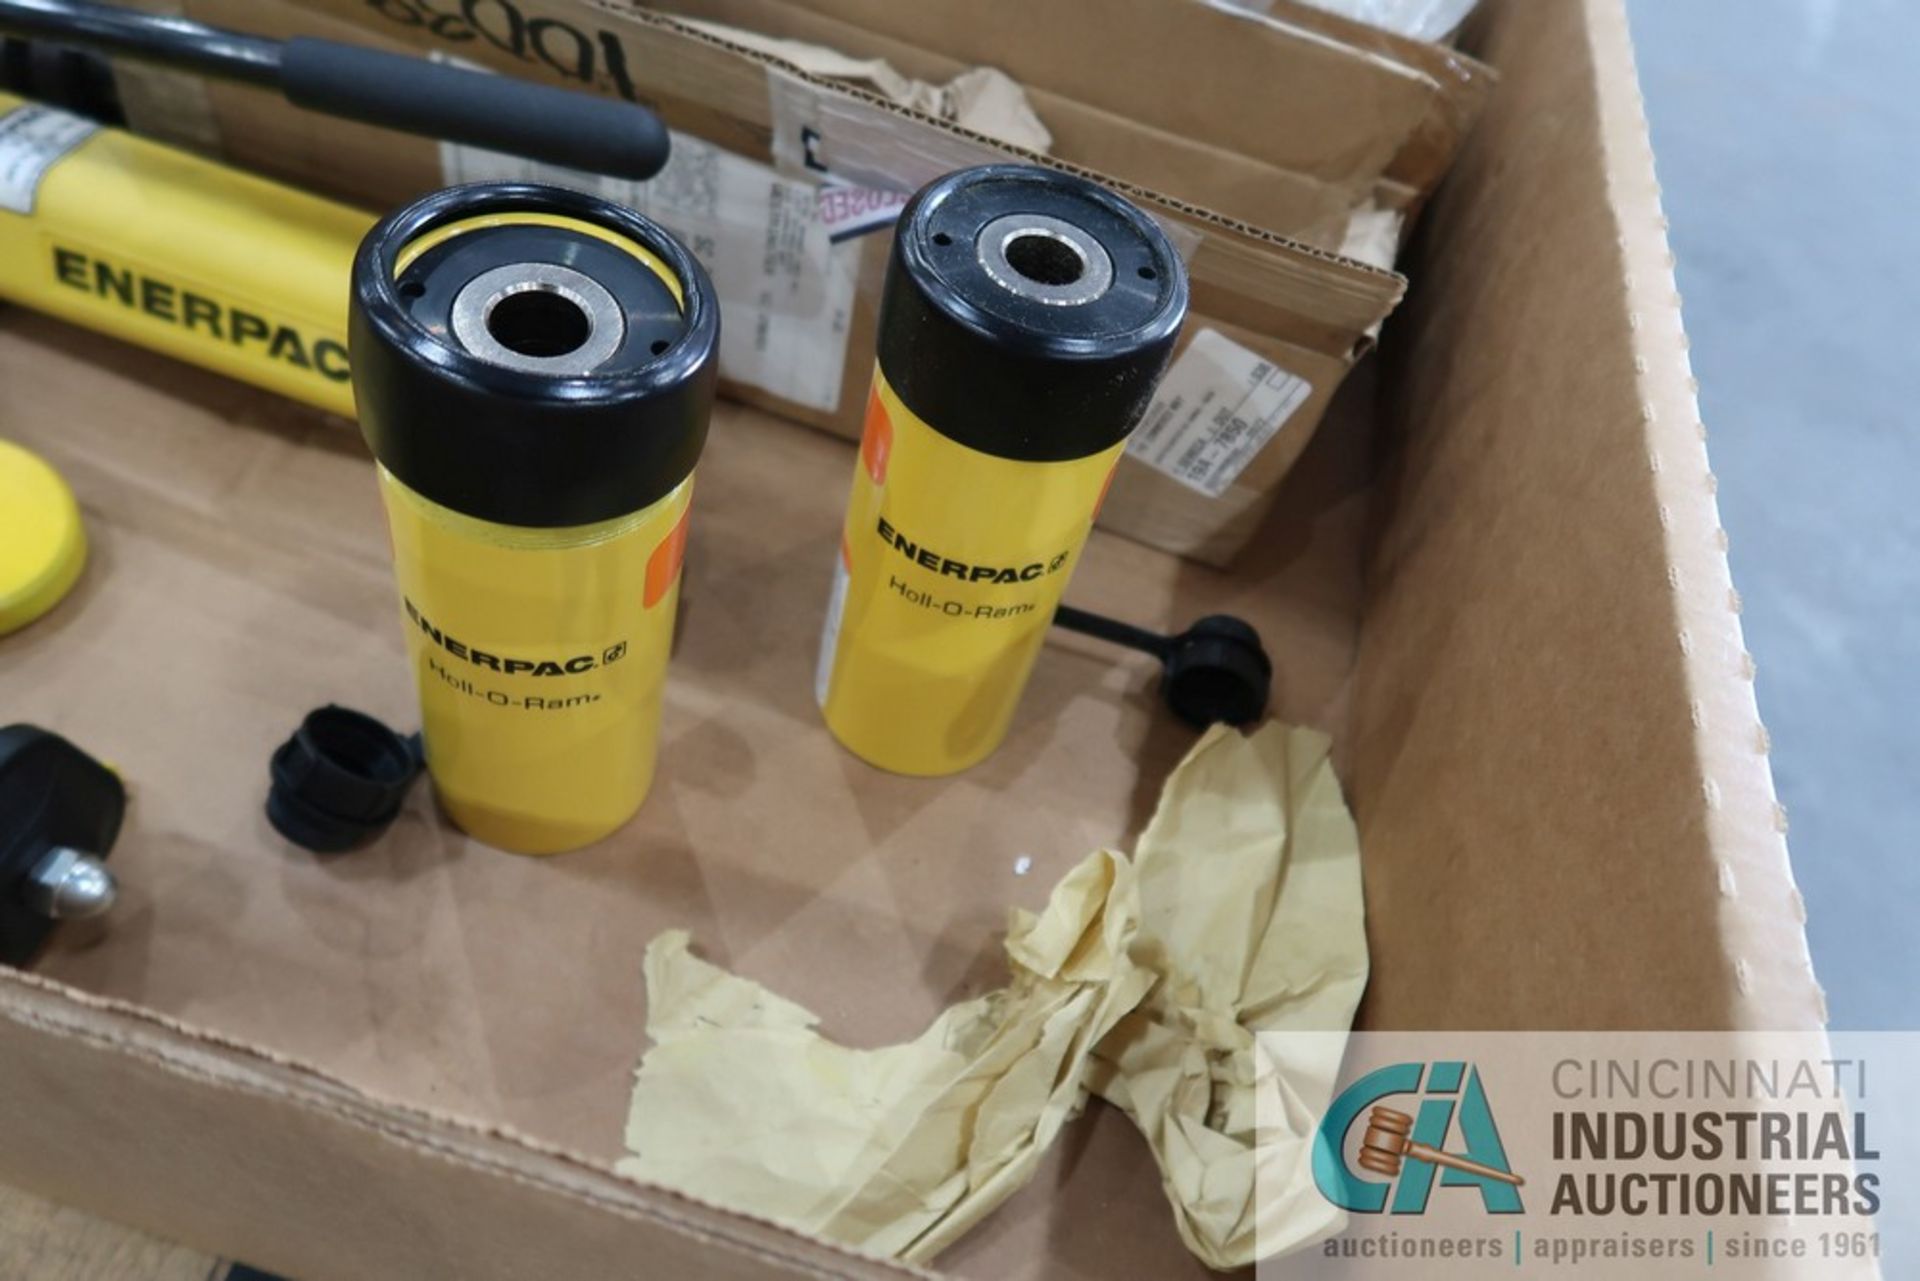 10,000 PSI MAX ENERPAC HAND HYDRAULIC PUMPS WITH (2) 12 TON CAP ENERPAC HOLL-O-RAM CYLINDERS - Image 2 of 4